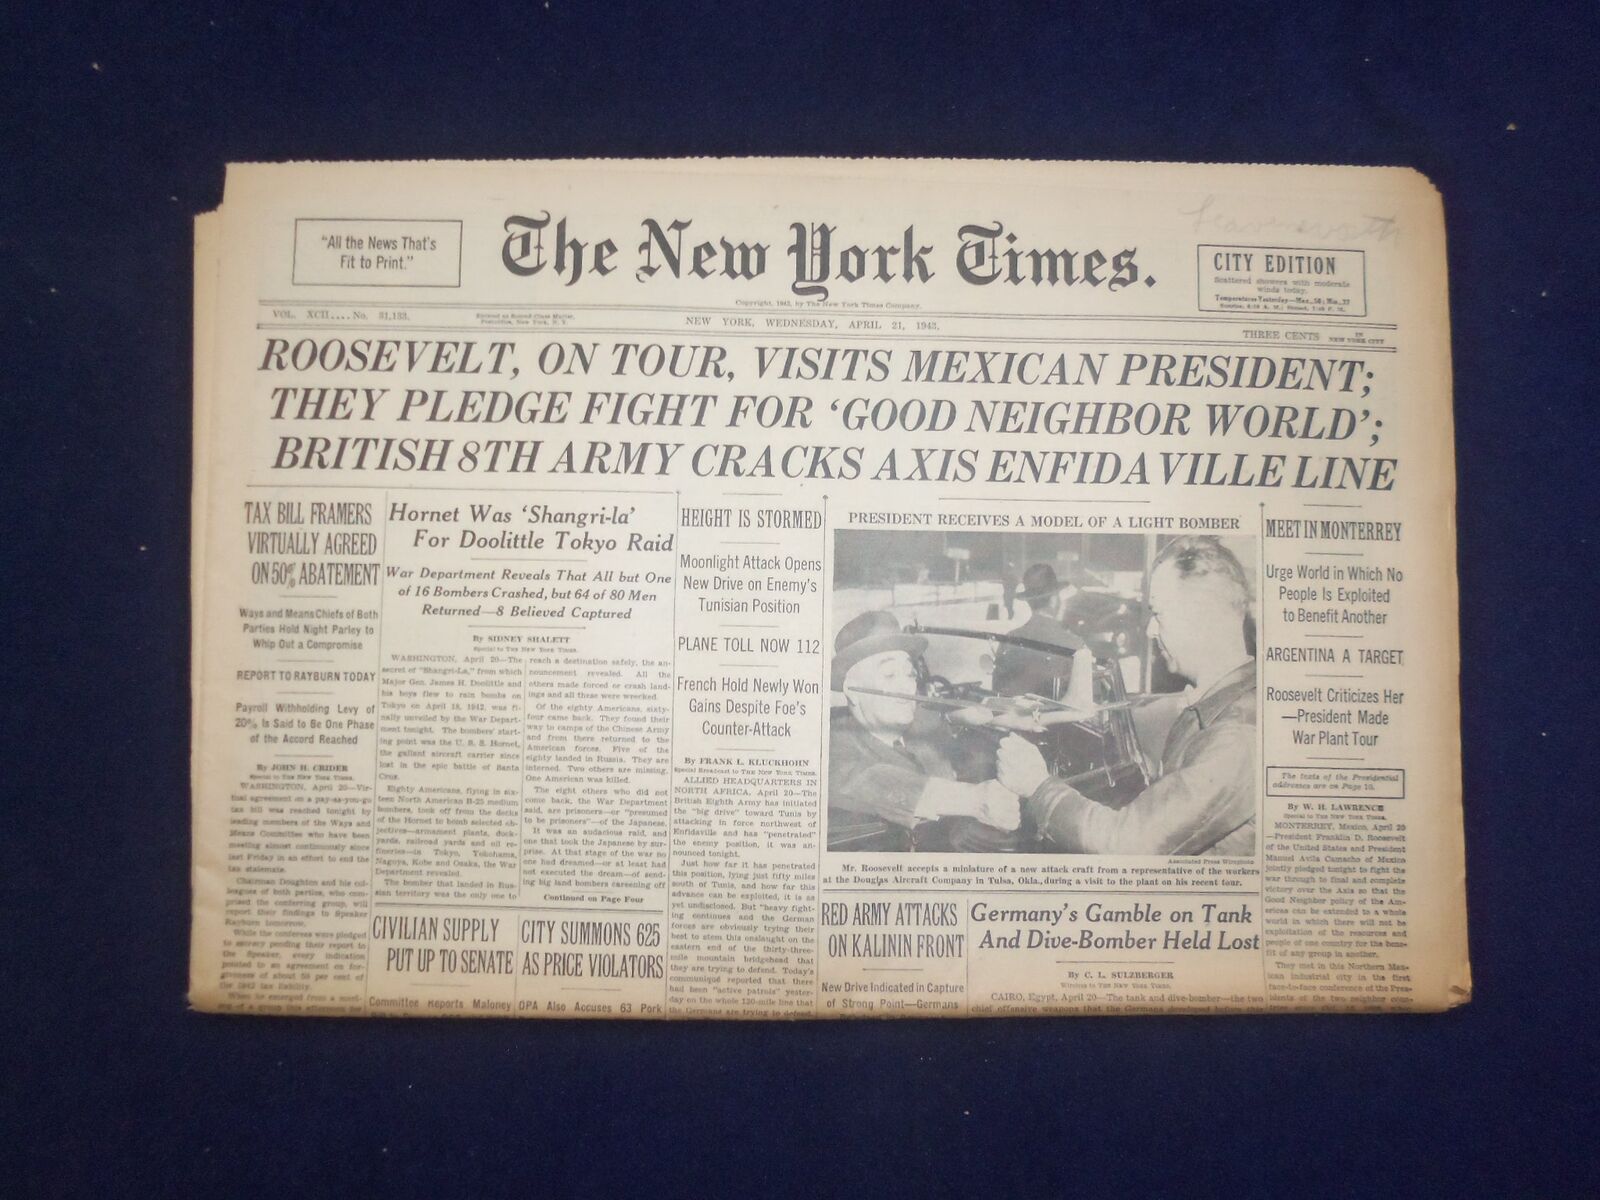 1943 APR 21 NEW YORK TIMES-ROOSEVELT, ON TOUR, VISITS MEXICAN PRESIDENT- NP 6532